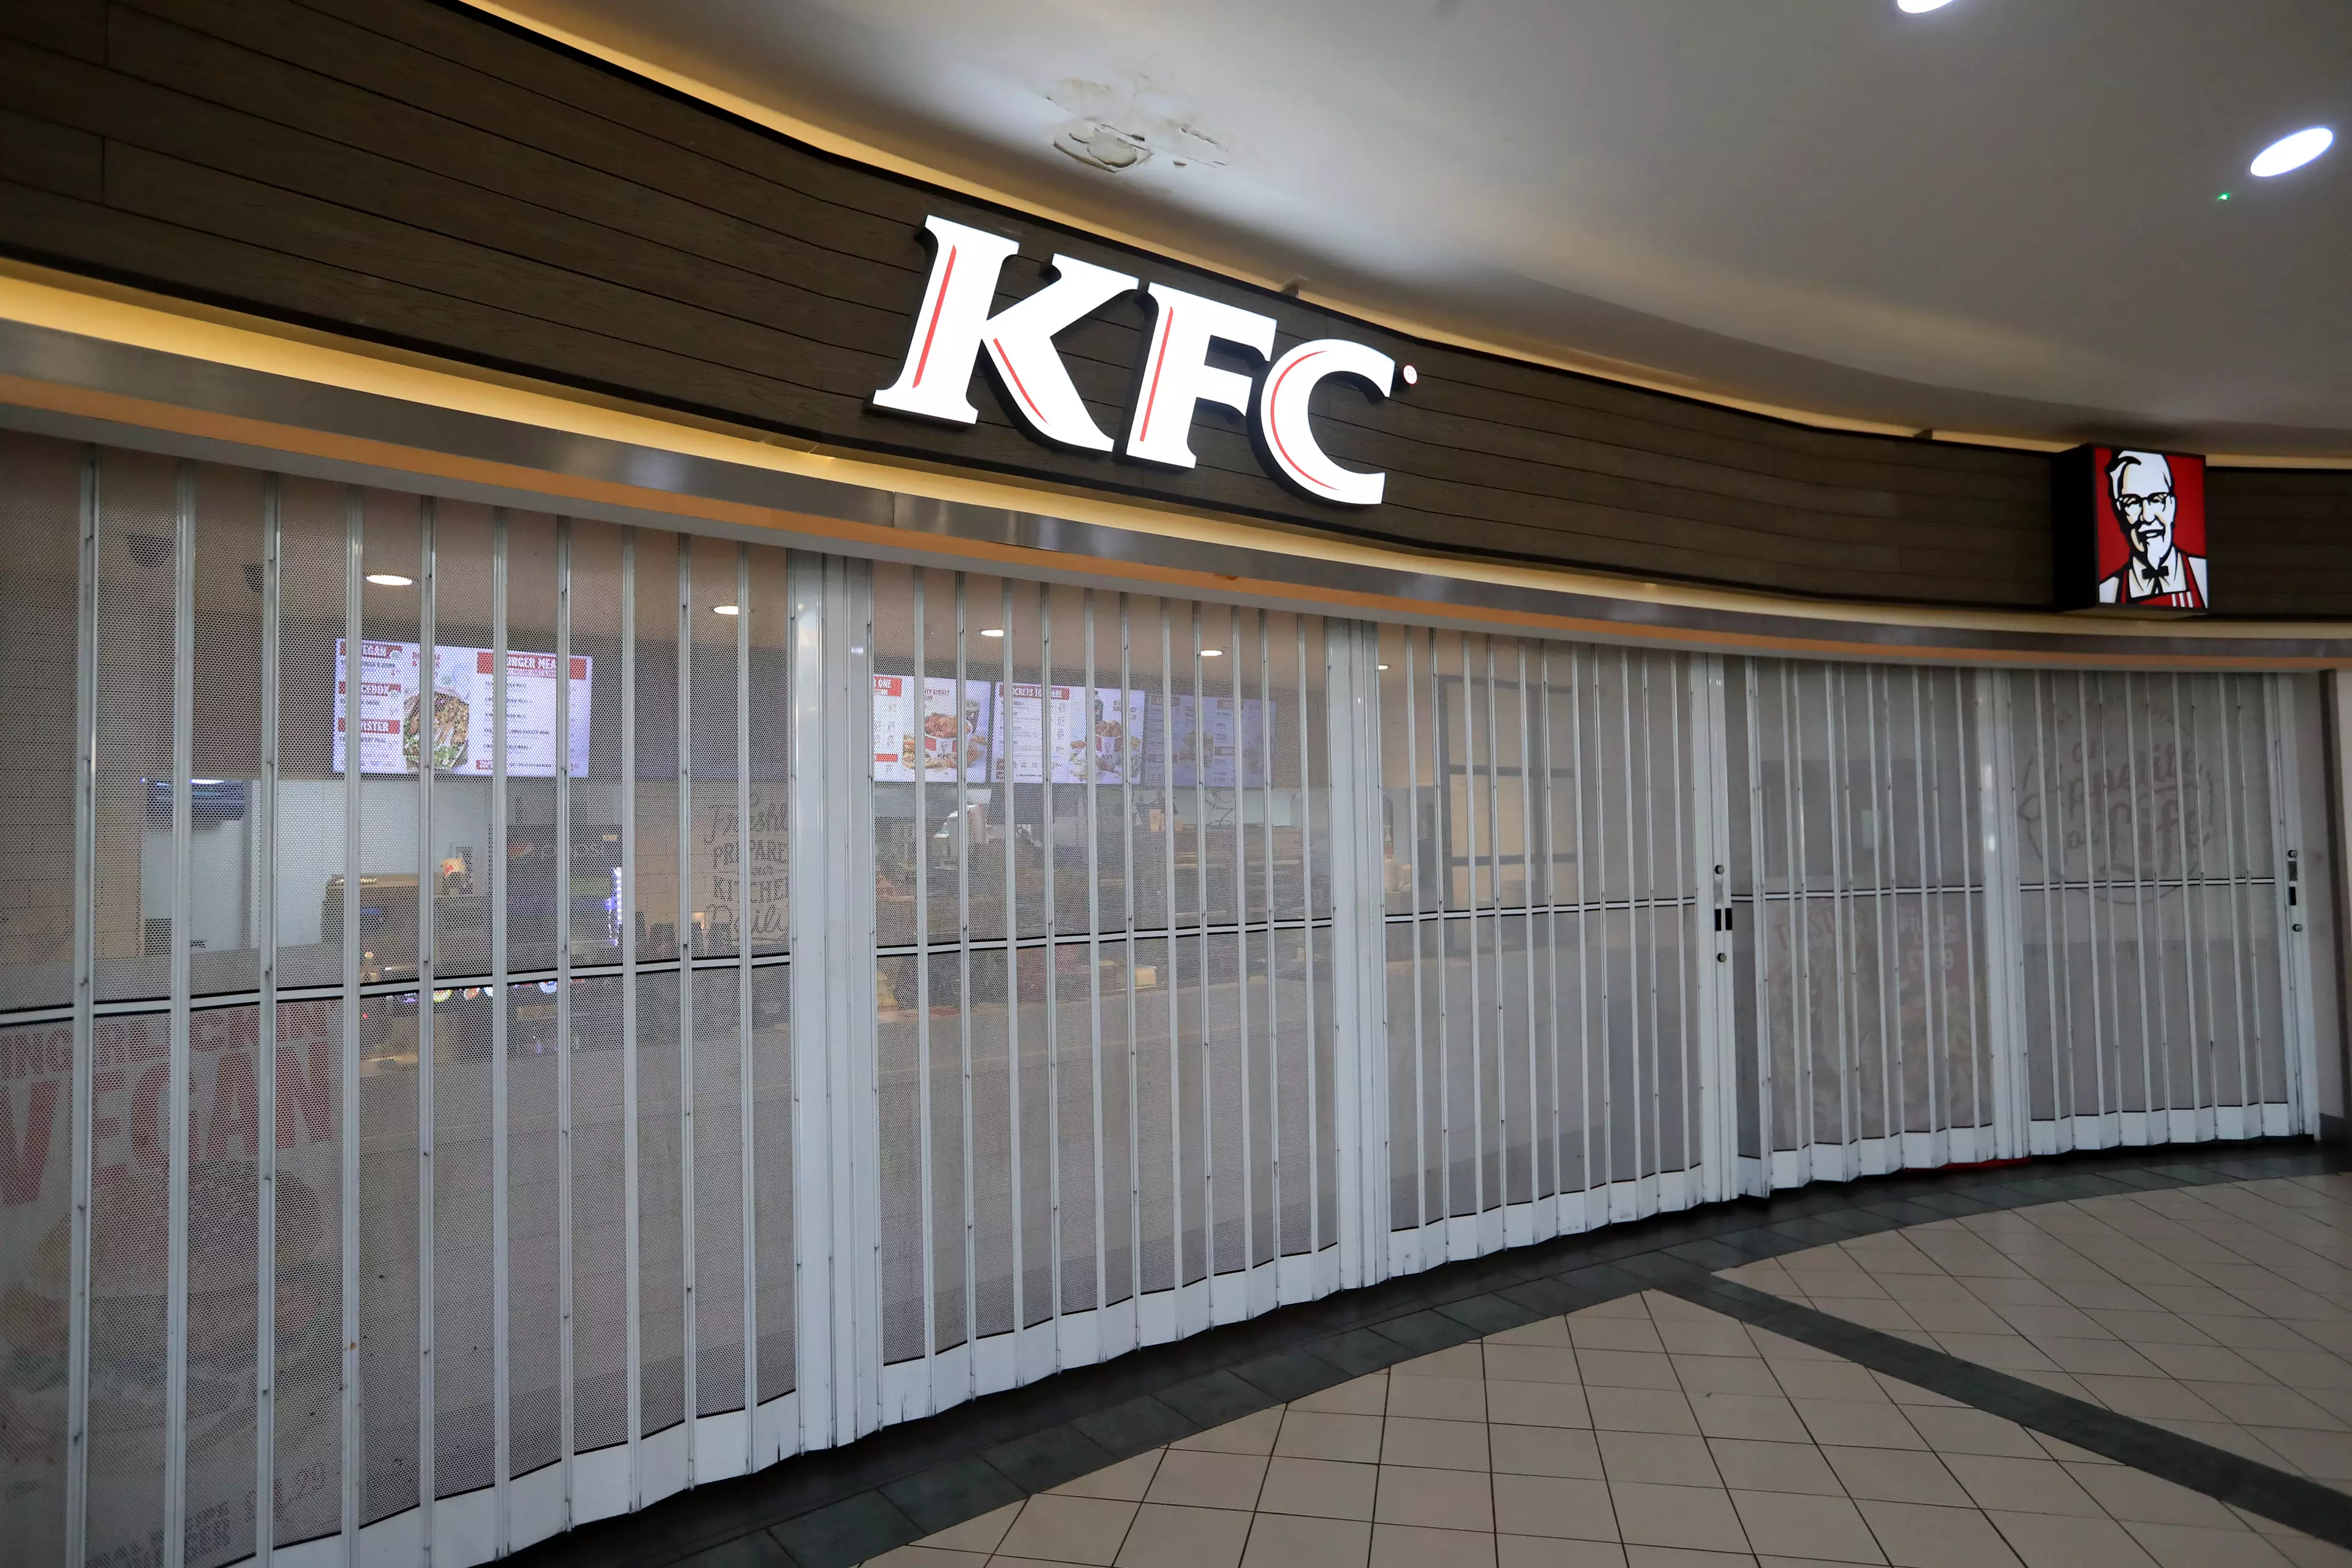 KFC has been closed since March.